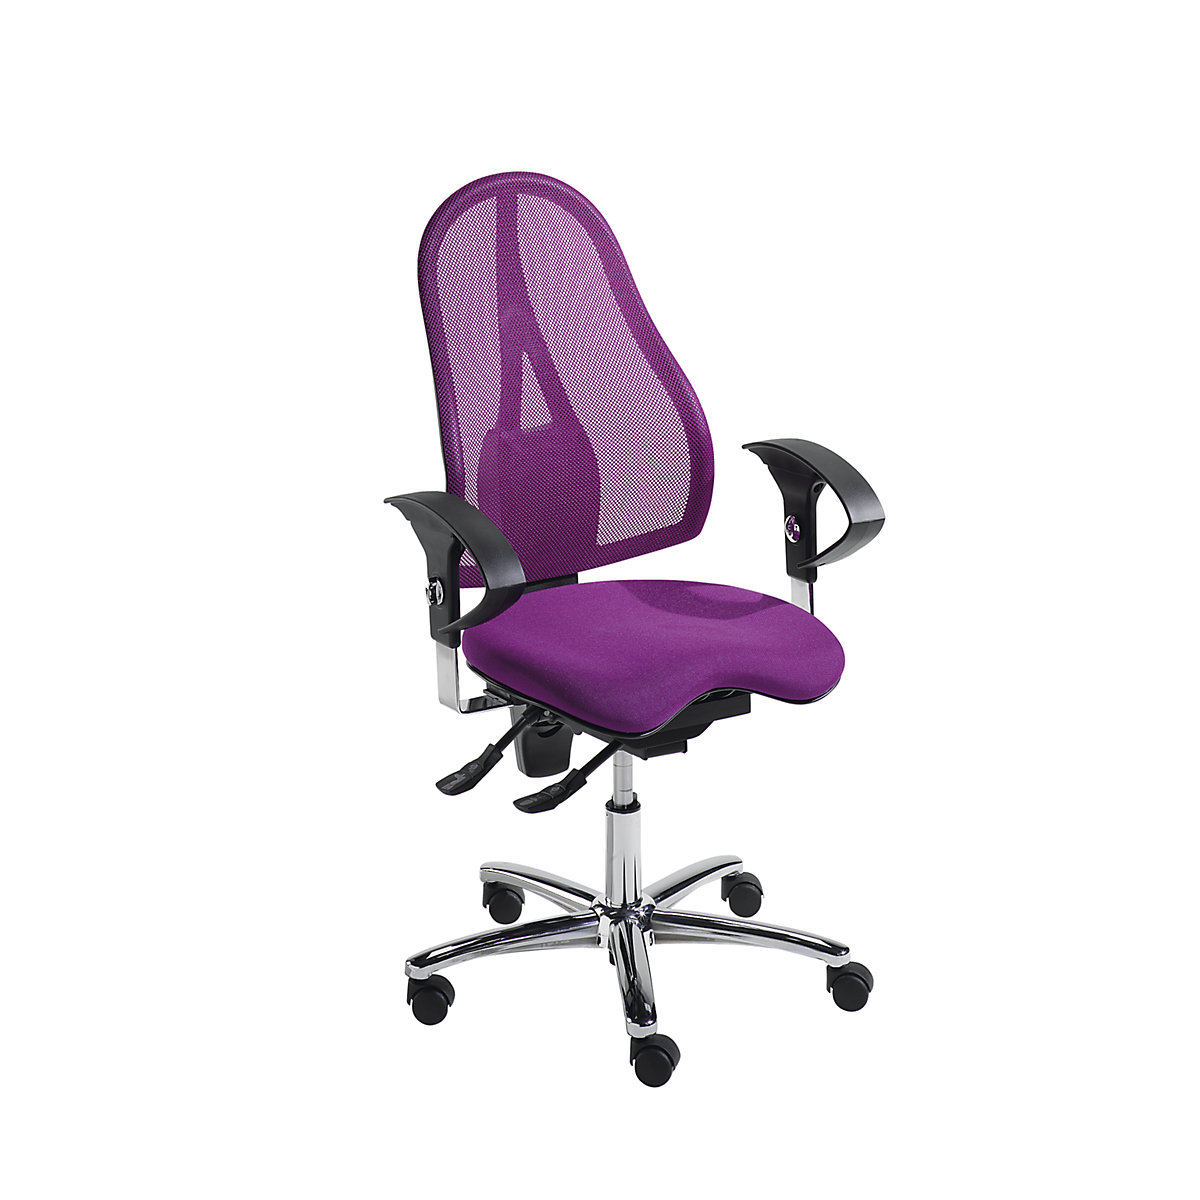 SITNESS 15 operator swivel chair – Topstar, with Body Balance Tec®, back rest with mesh covering, purple-5